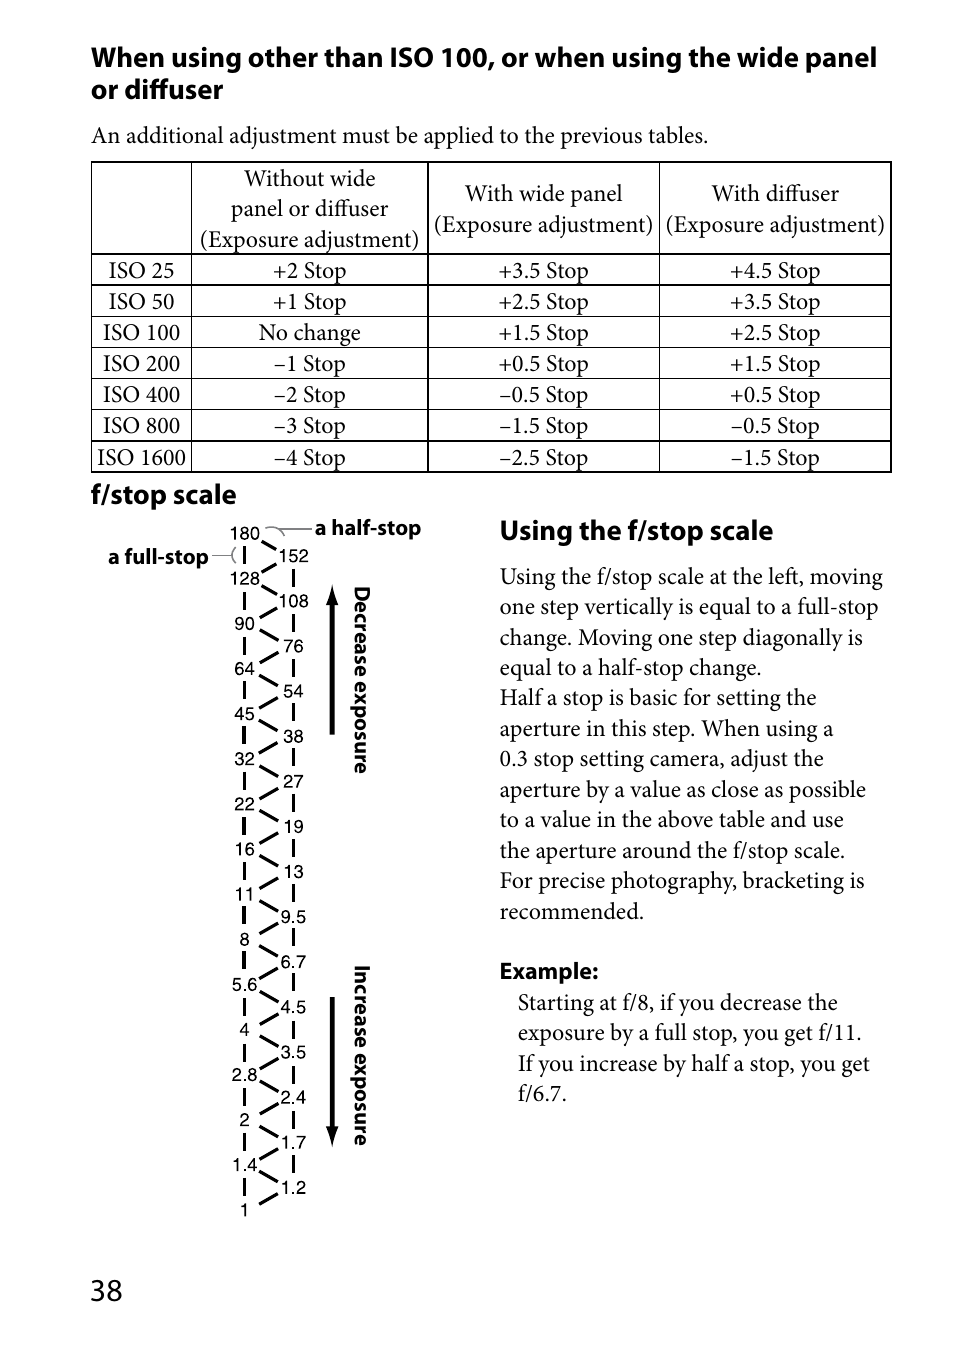 F/stop scale, Using the f/stop scale | Sony HVL-MT24AM User Manual | Page 38 / 295